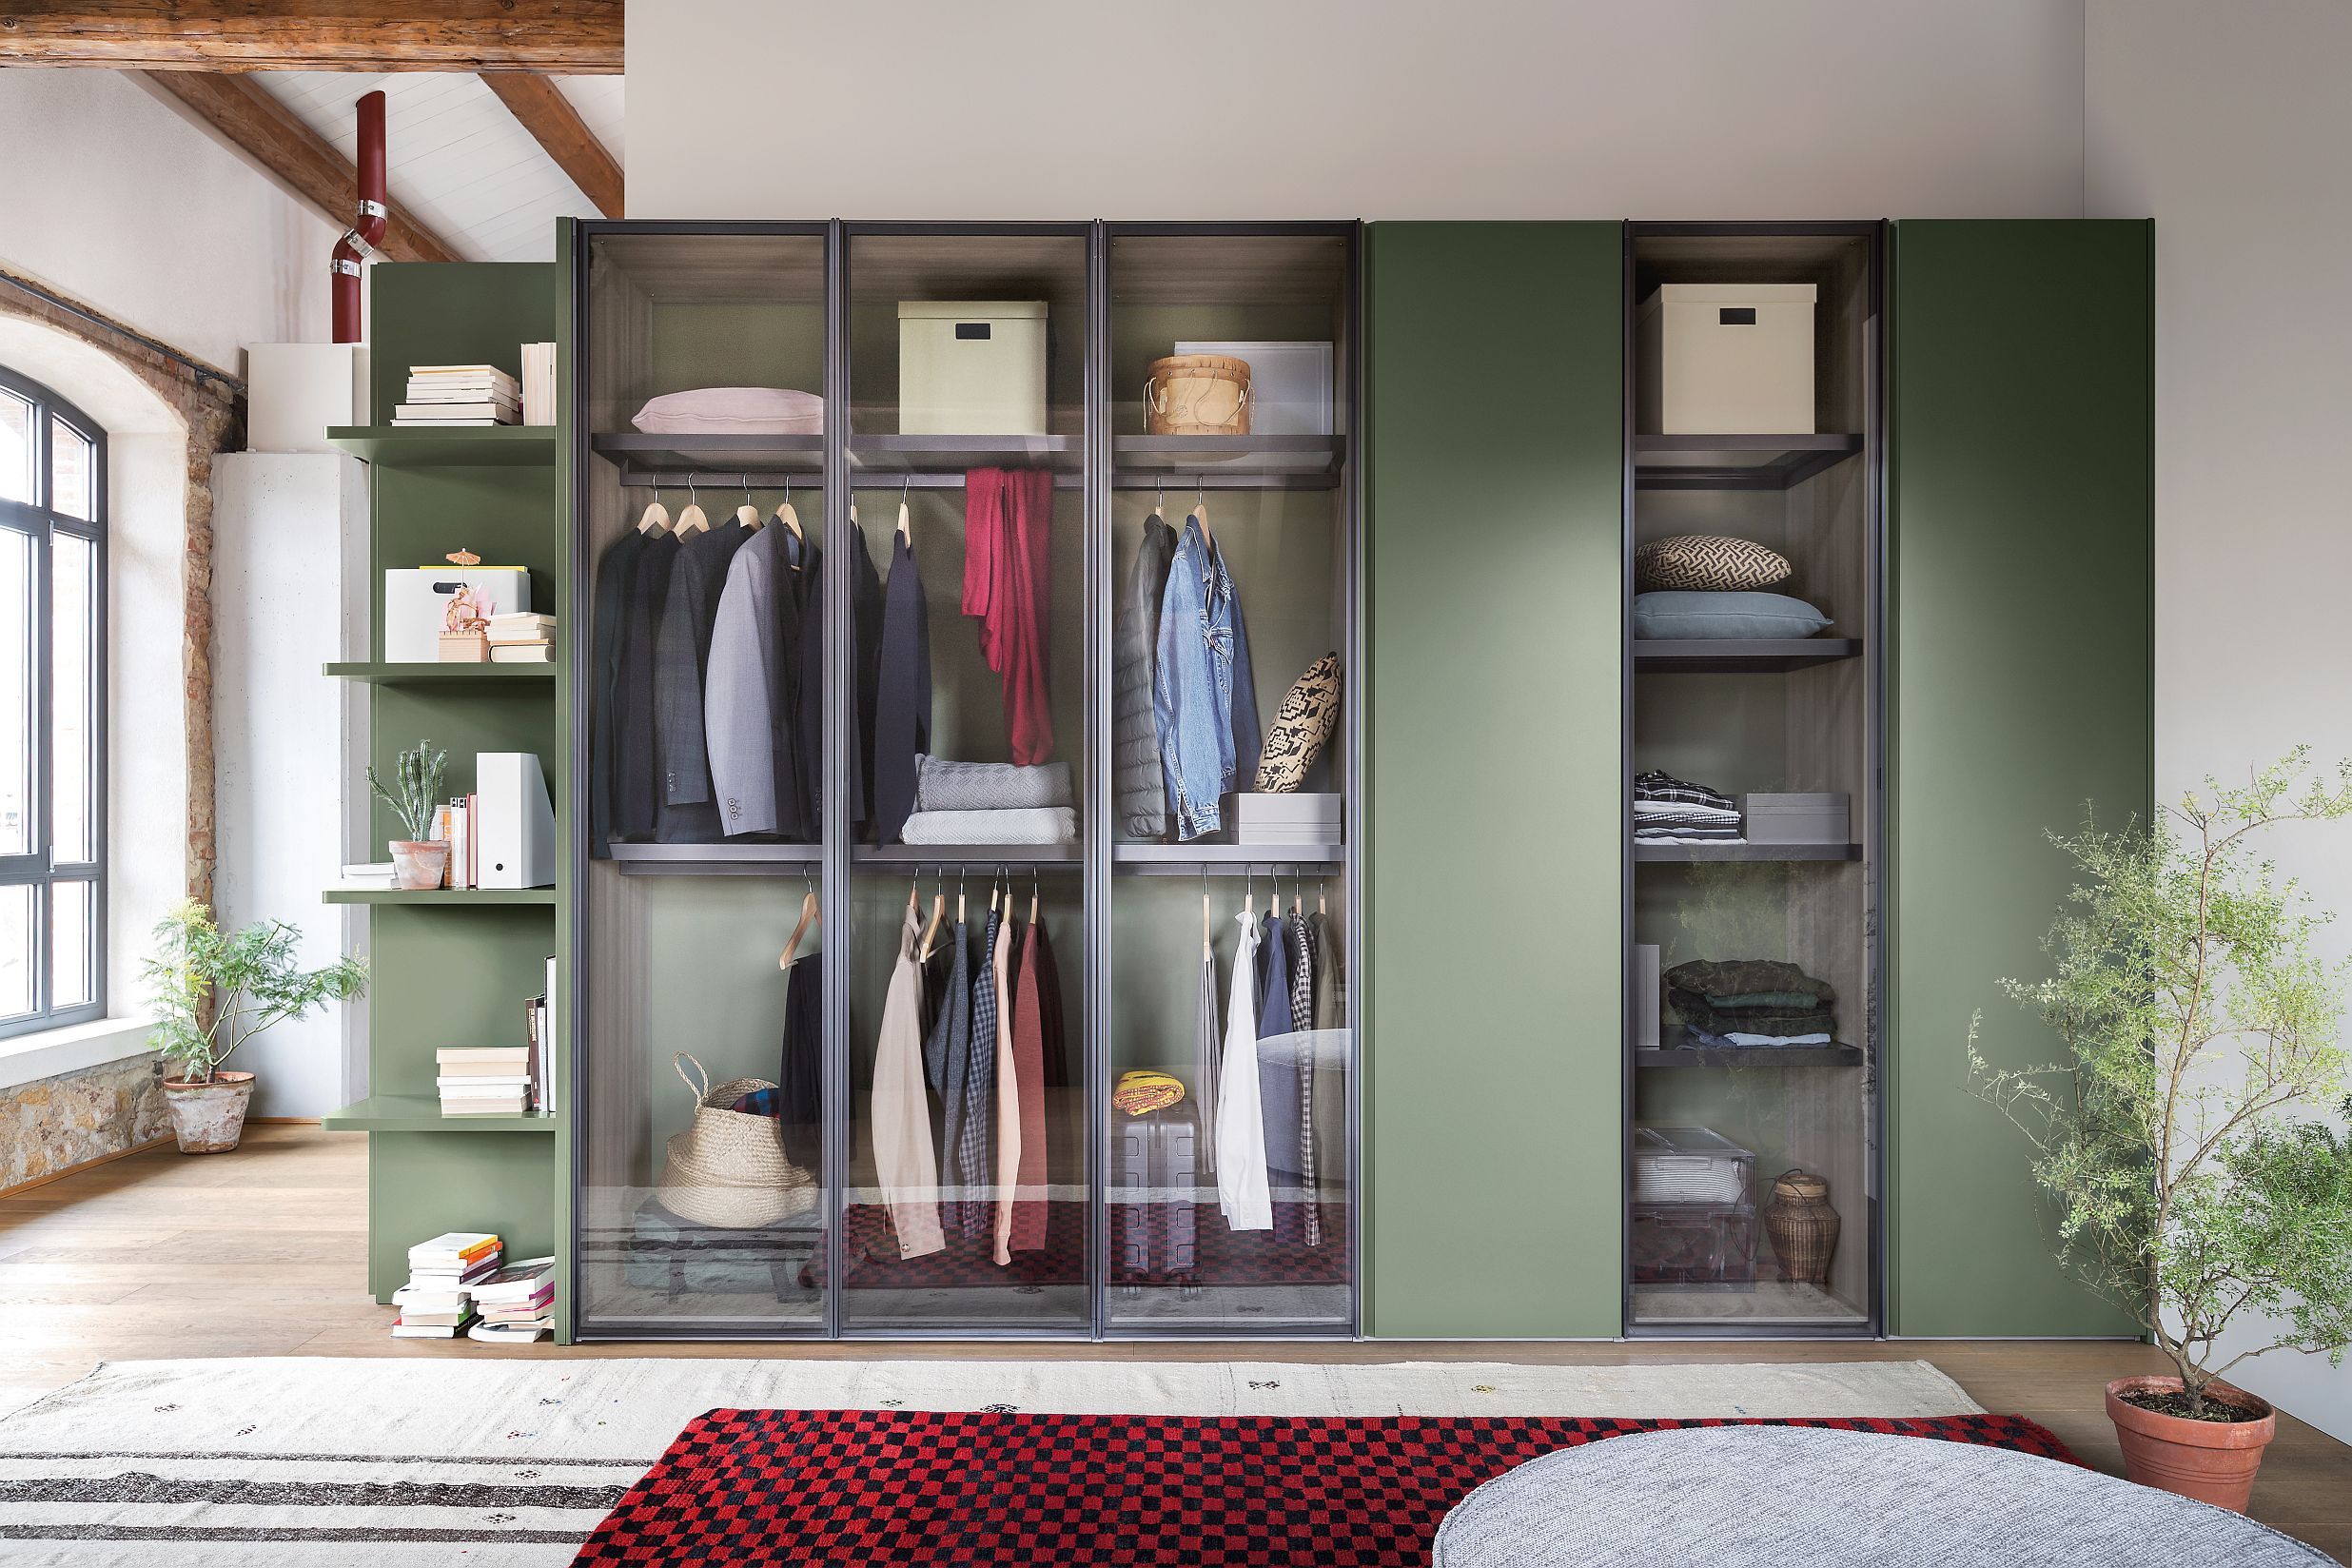 15 Fabulous Built In Wardrobe Ideas For All Interior Styles | Real Homes For Built In Wardrobes (View 7 of 15)